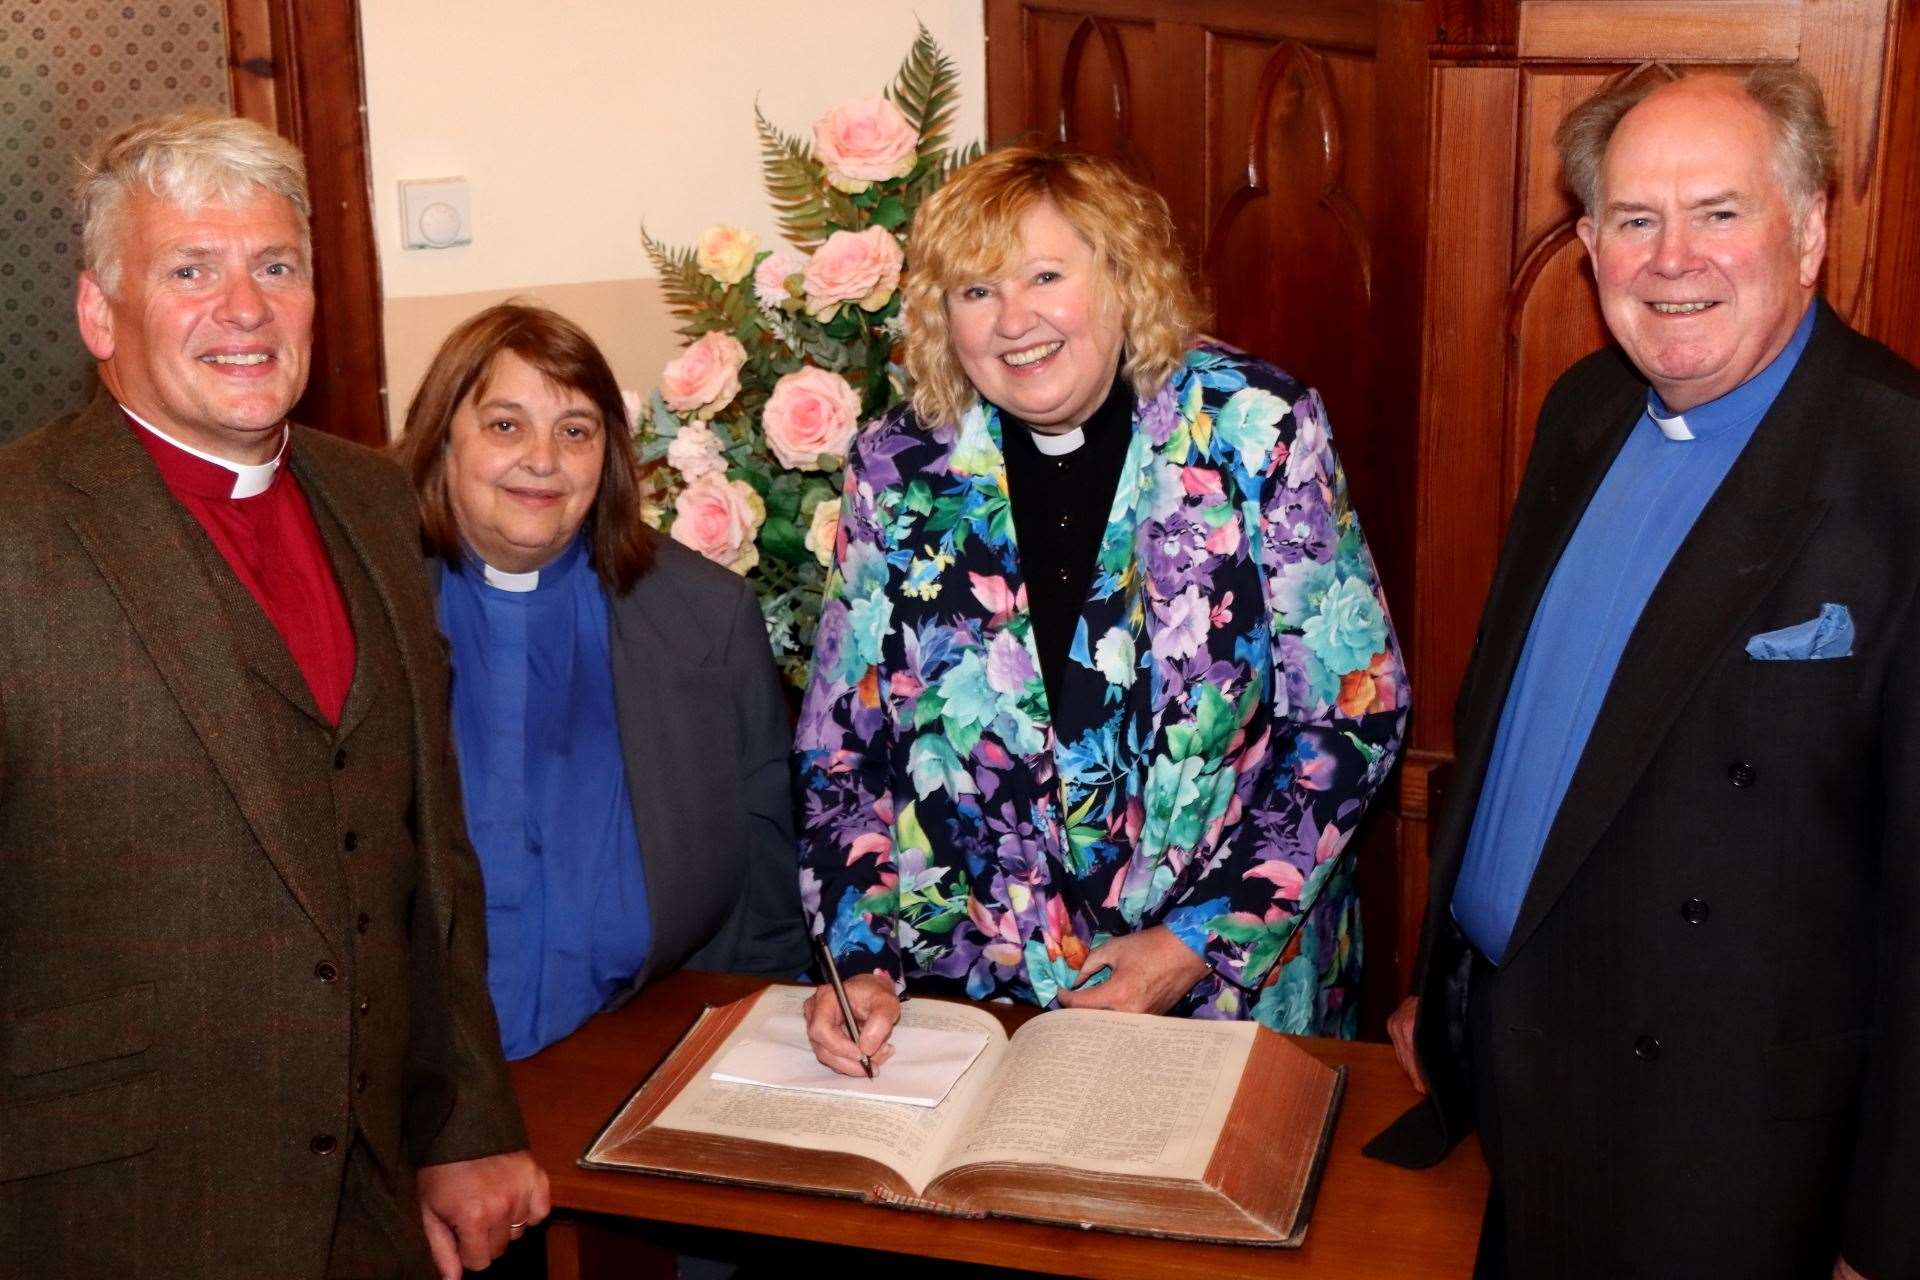 The Rev Janet Easton-Berry, the new minister for the Pentland Parish (centre), after the induction service with (from left) the Rev David Malcolm (Thurso St Peter's and St Andrew's Church), the Rev Heather Stewart (presbytery clerk), and the Rev Lyall Rennie (moderator of Caithness Presbytery). Picture: Neil Buchan